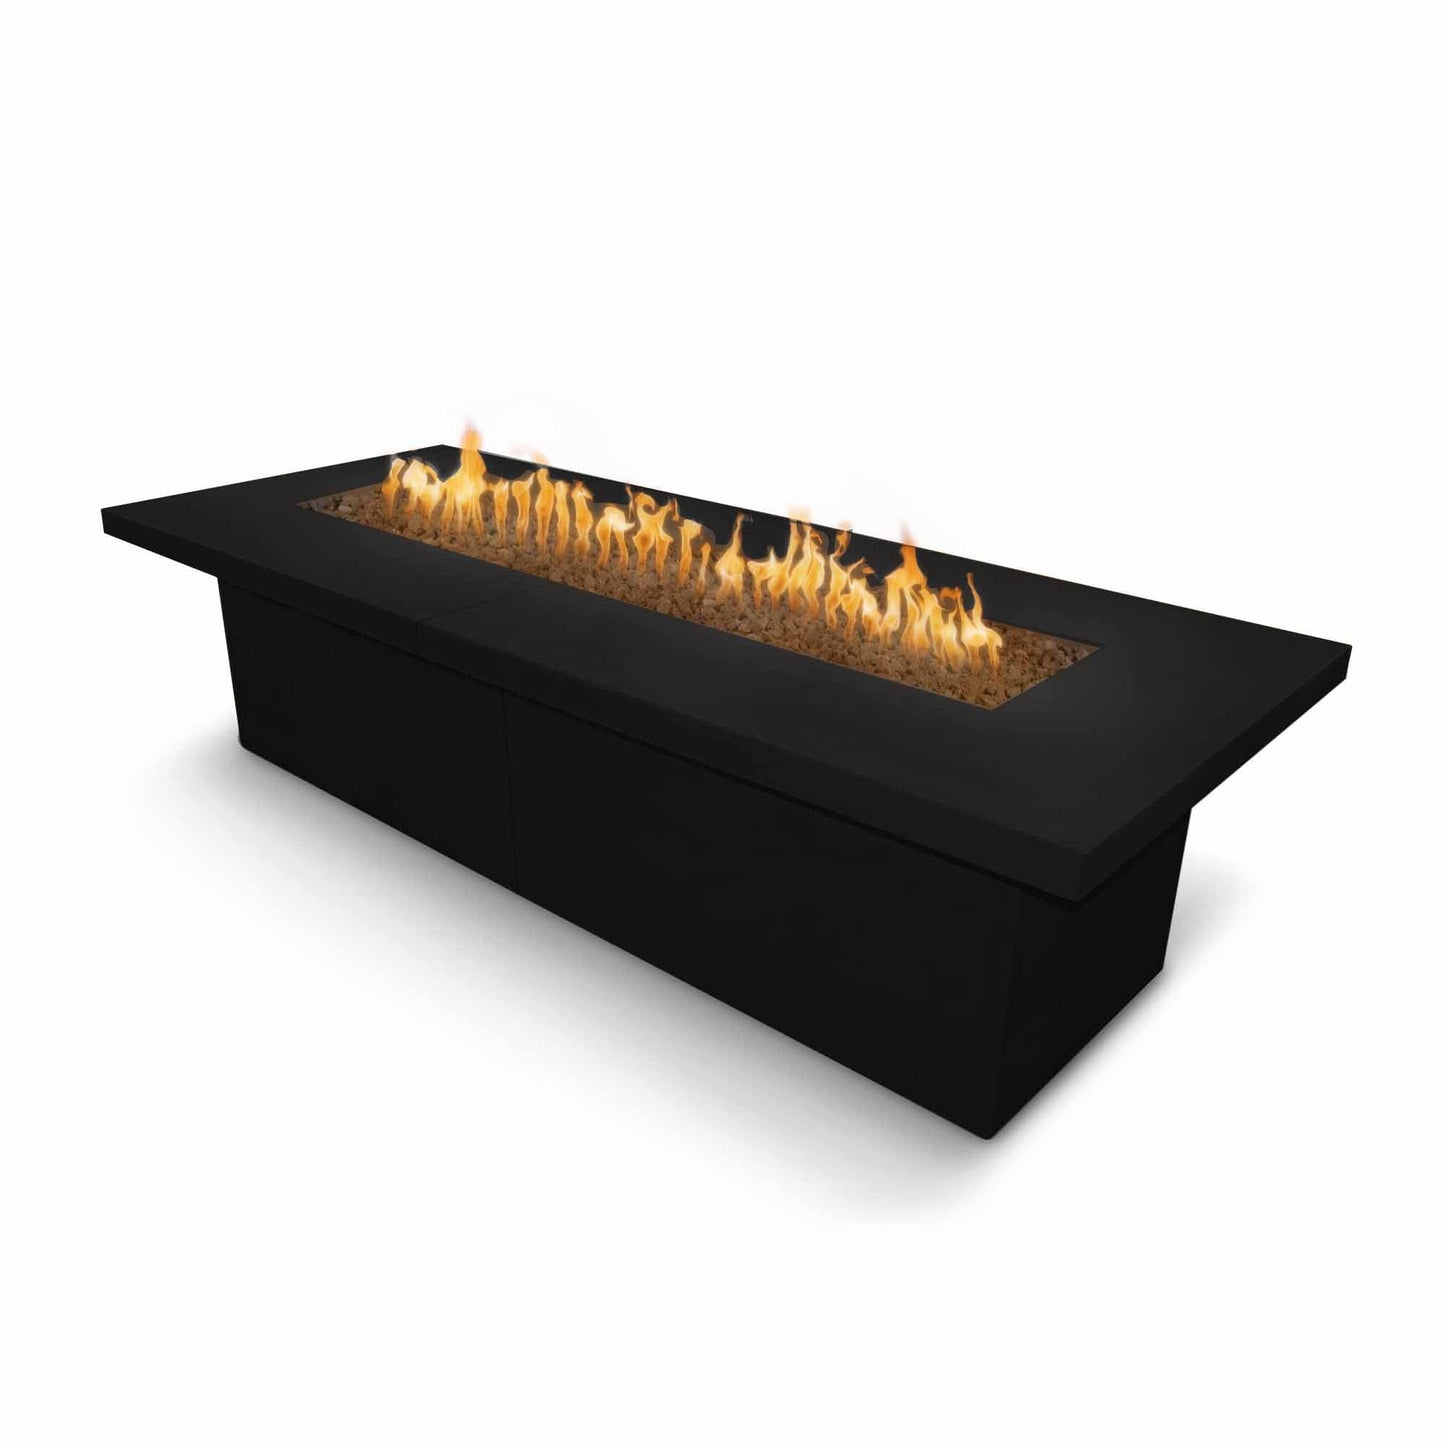 The Outdoor Plus Rectangular Newport 72" White Powder Coated Metal Liquid Propane Fire Pit with 110V Electronic Ignition